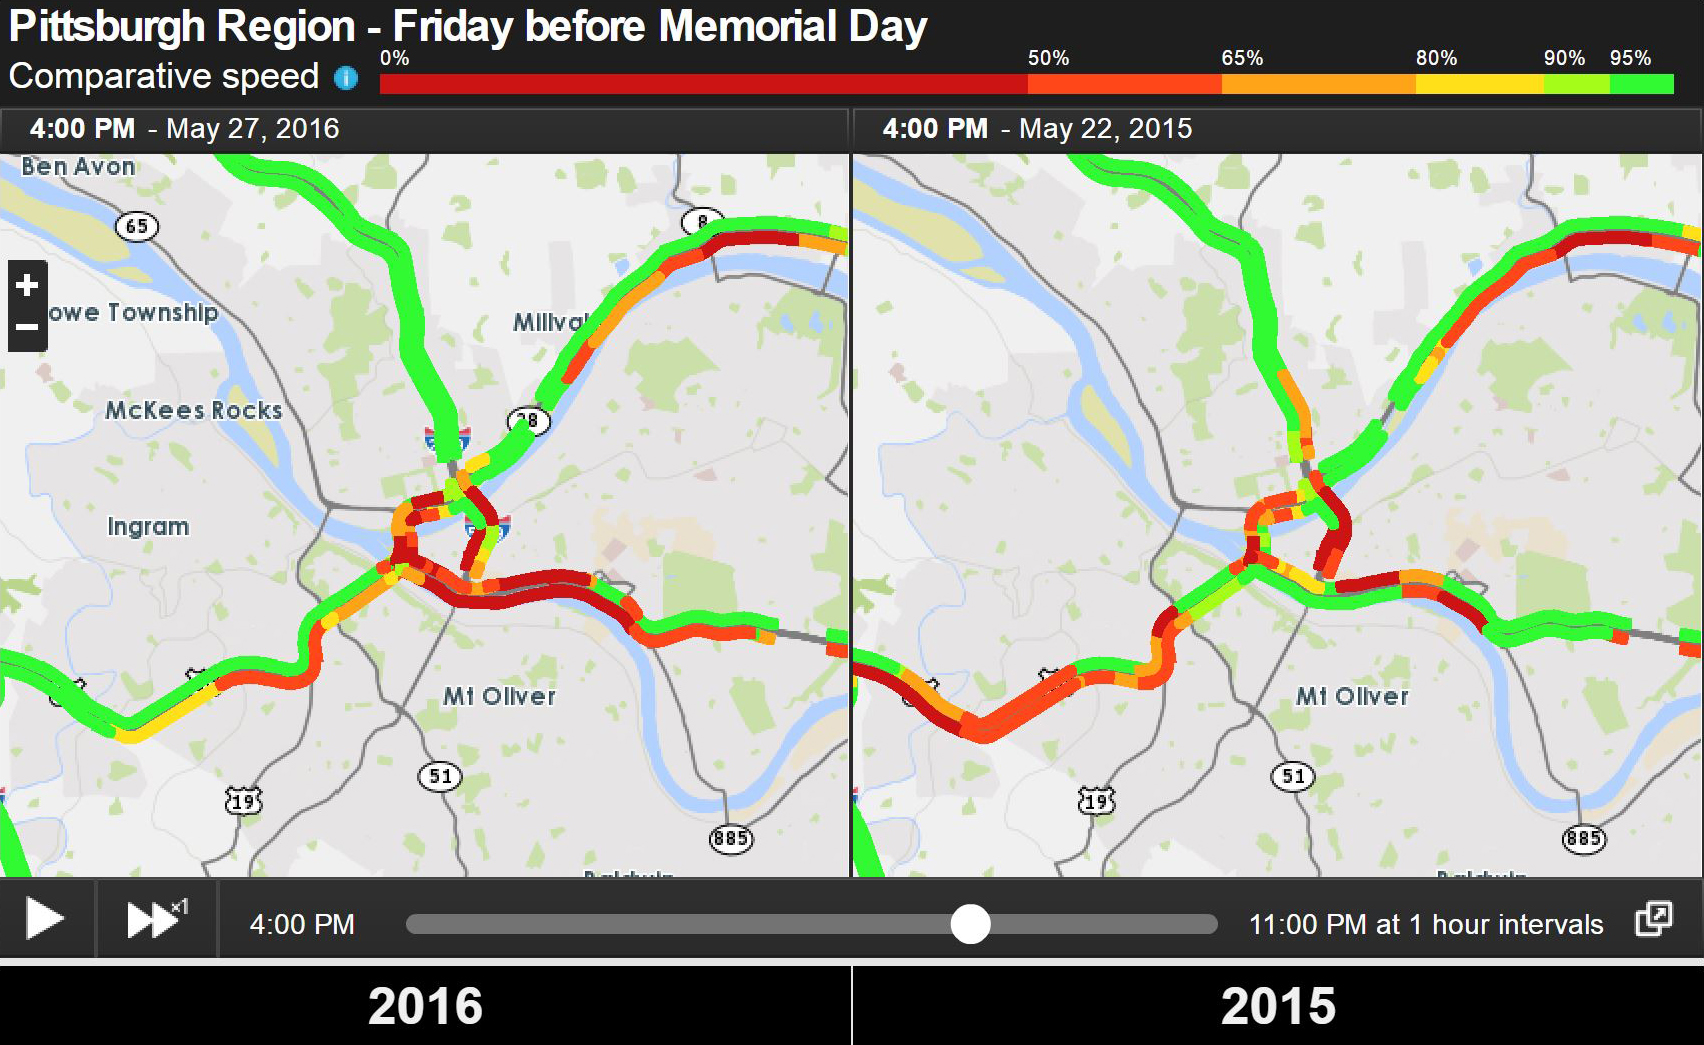 memorial day historic travel side by side maps for pittsburgh region